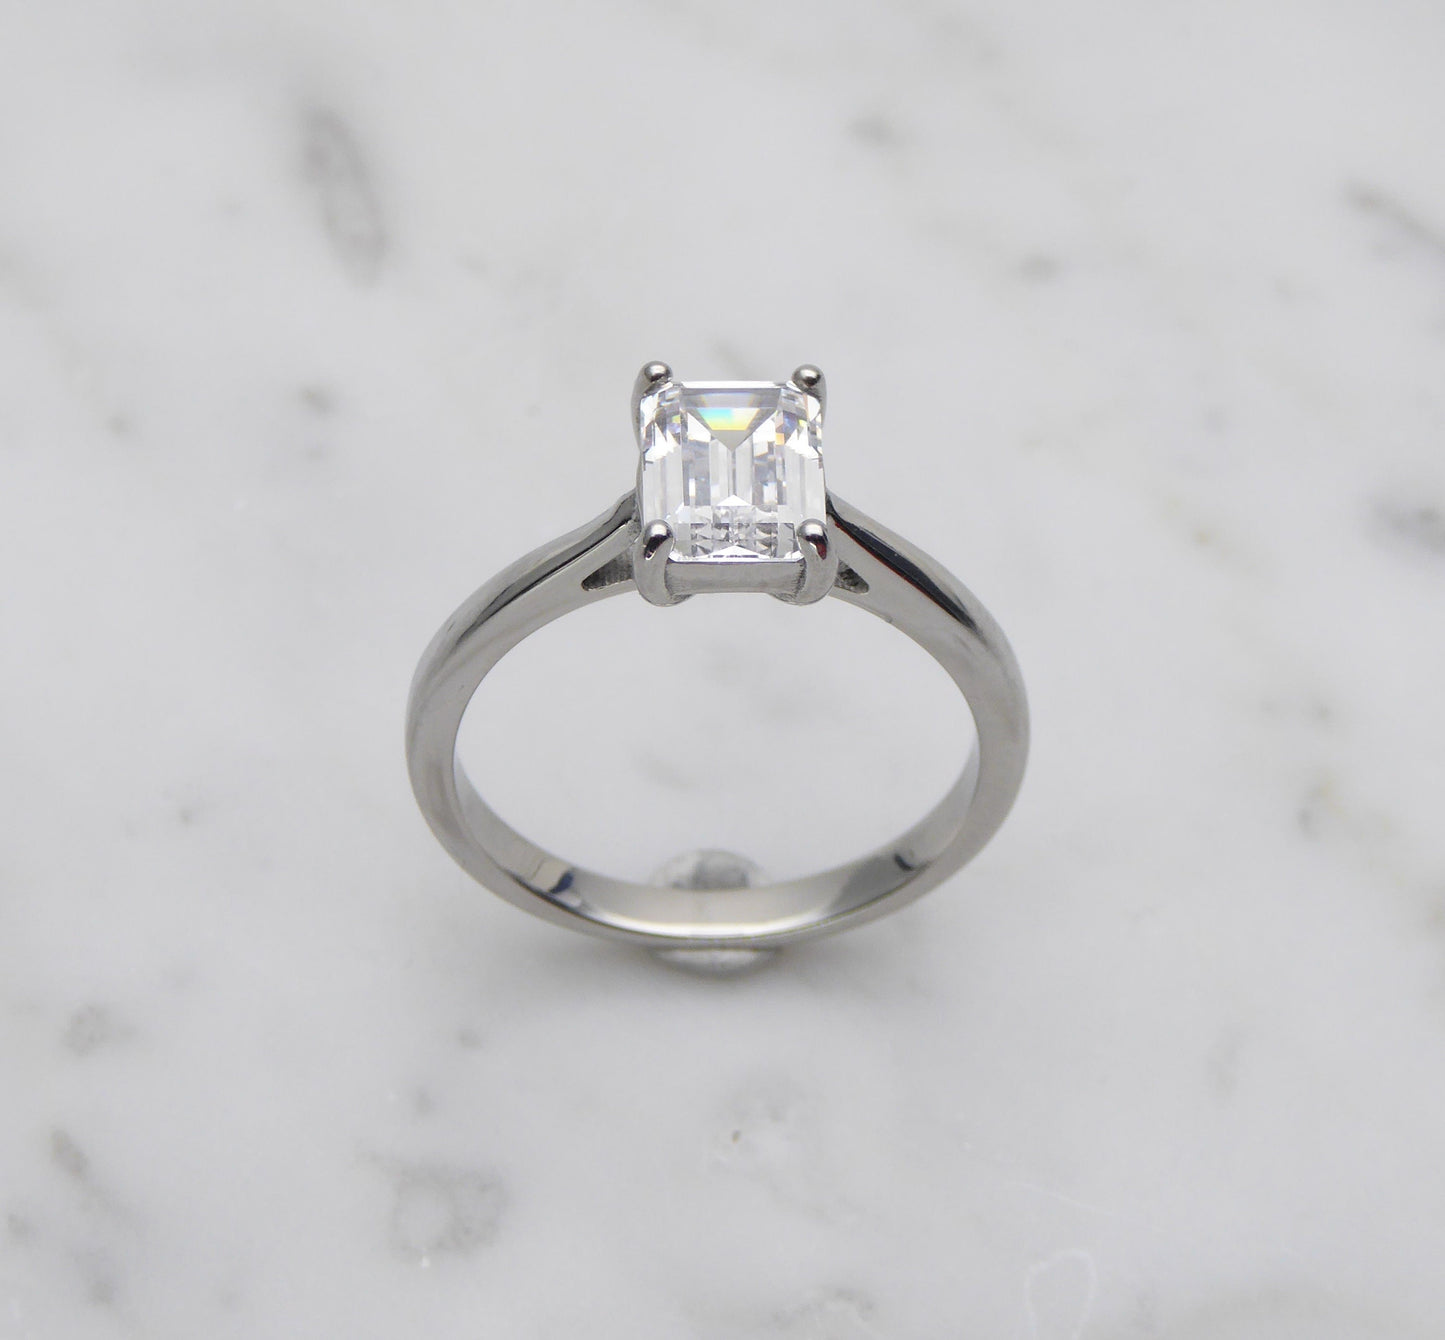 2ct Emerald Cut Solitaire cathedral ring in Titanium or White Gold - Simulated diamond or Moissanite available